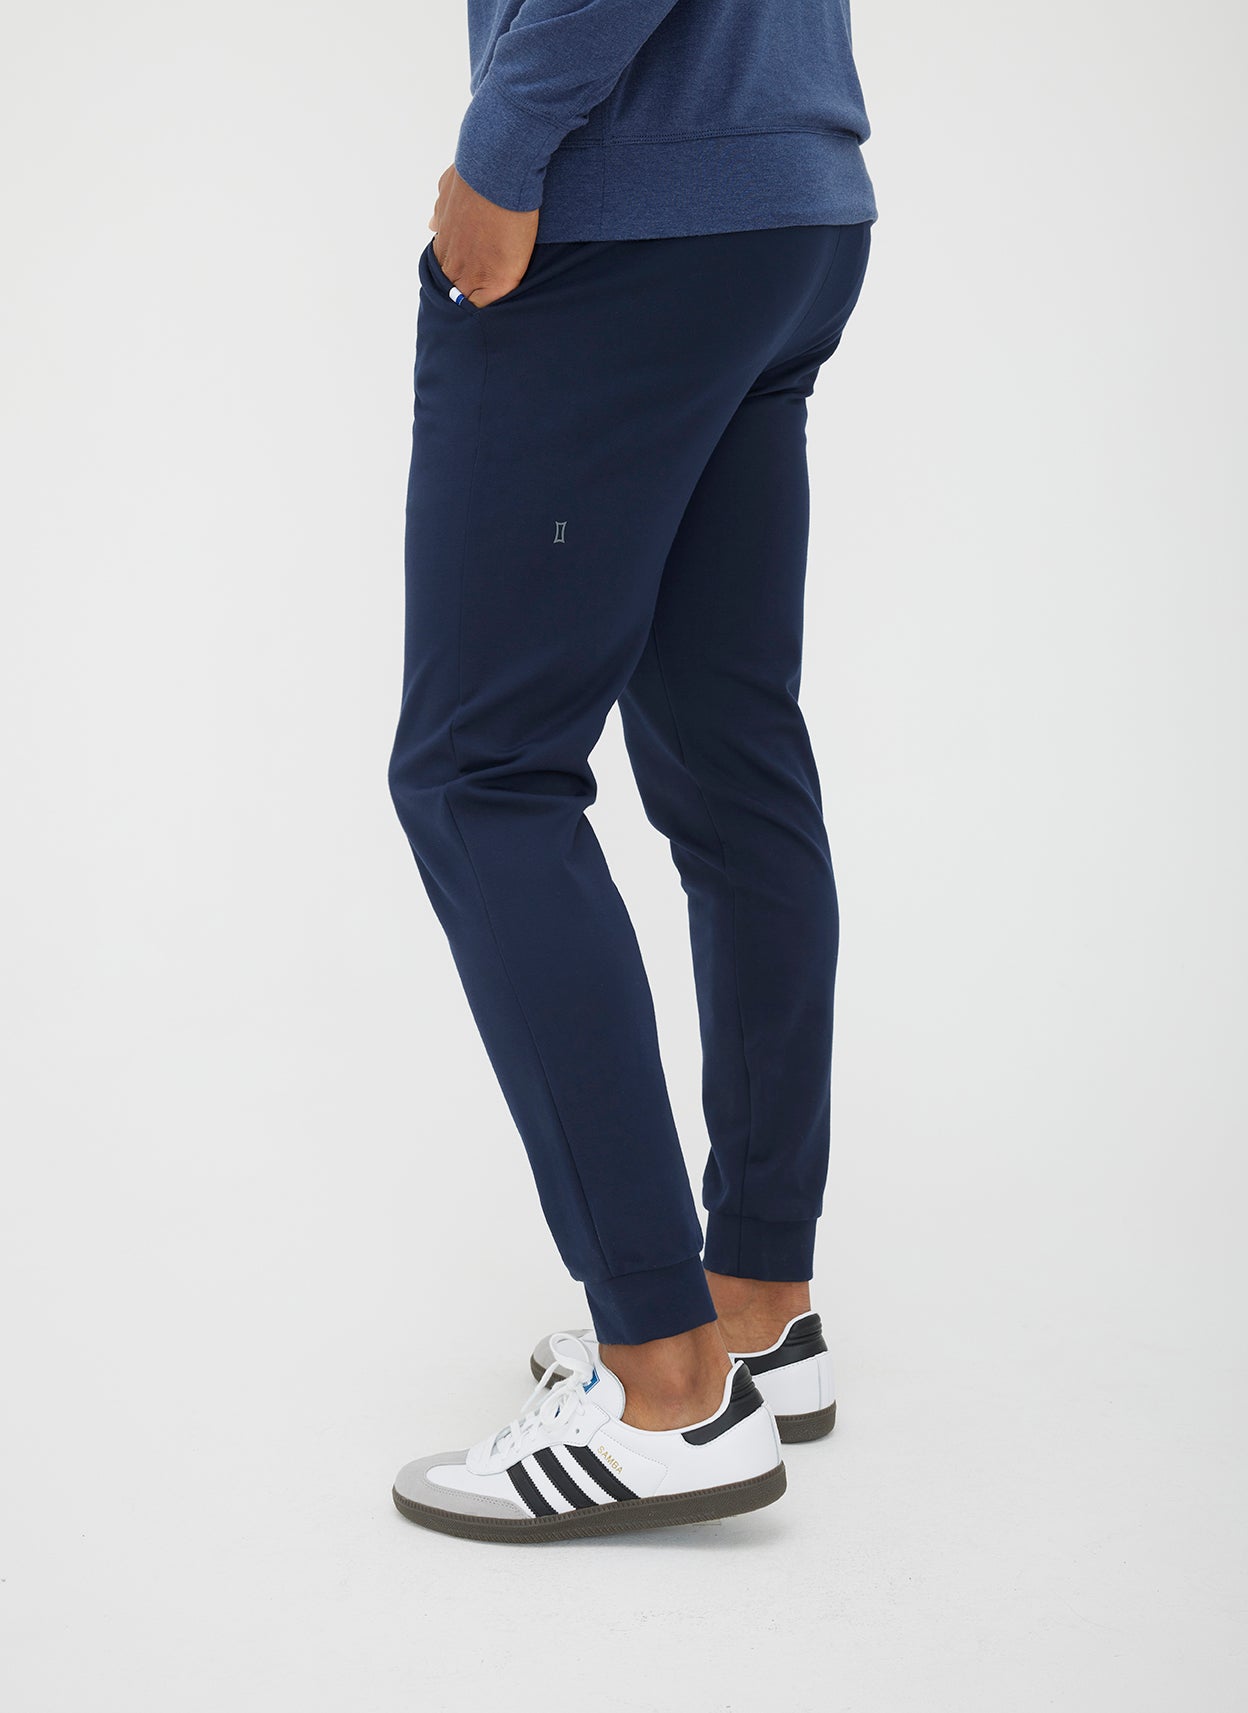 Arrival Knit Joggers